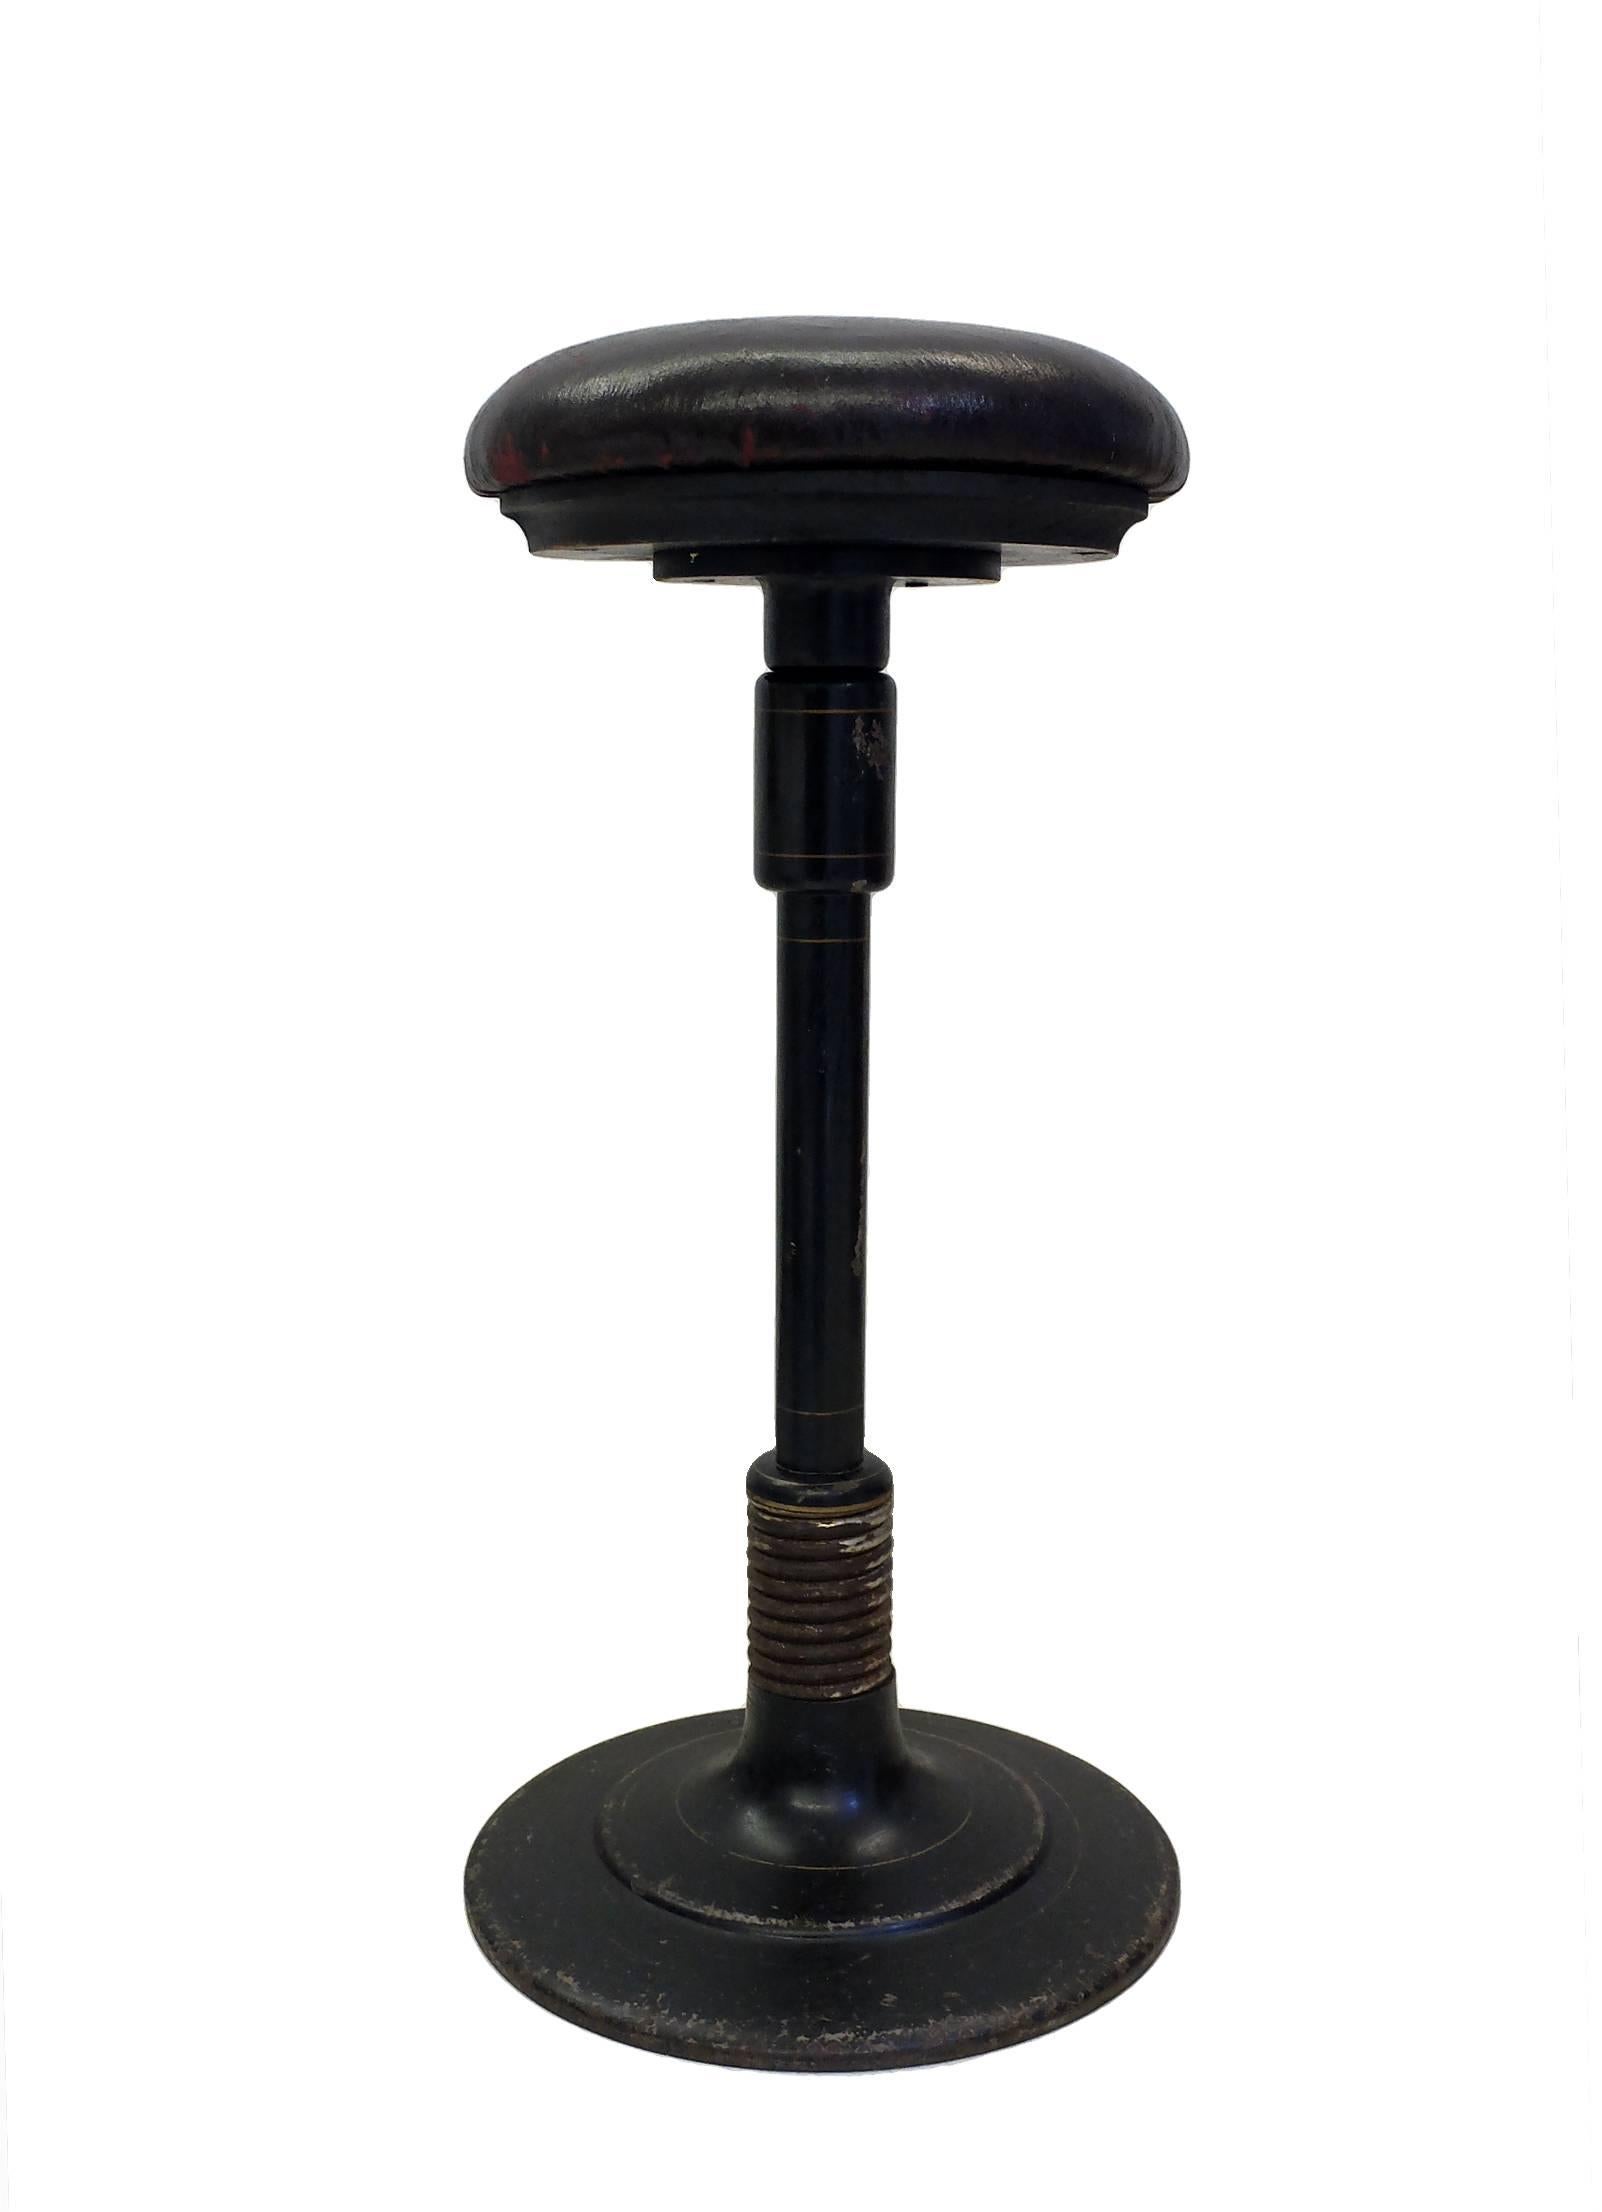  An unusual adjustable cast iron dentist’s stool with a big metal spring, weight motion. Original black color. France, circa 1890.